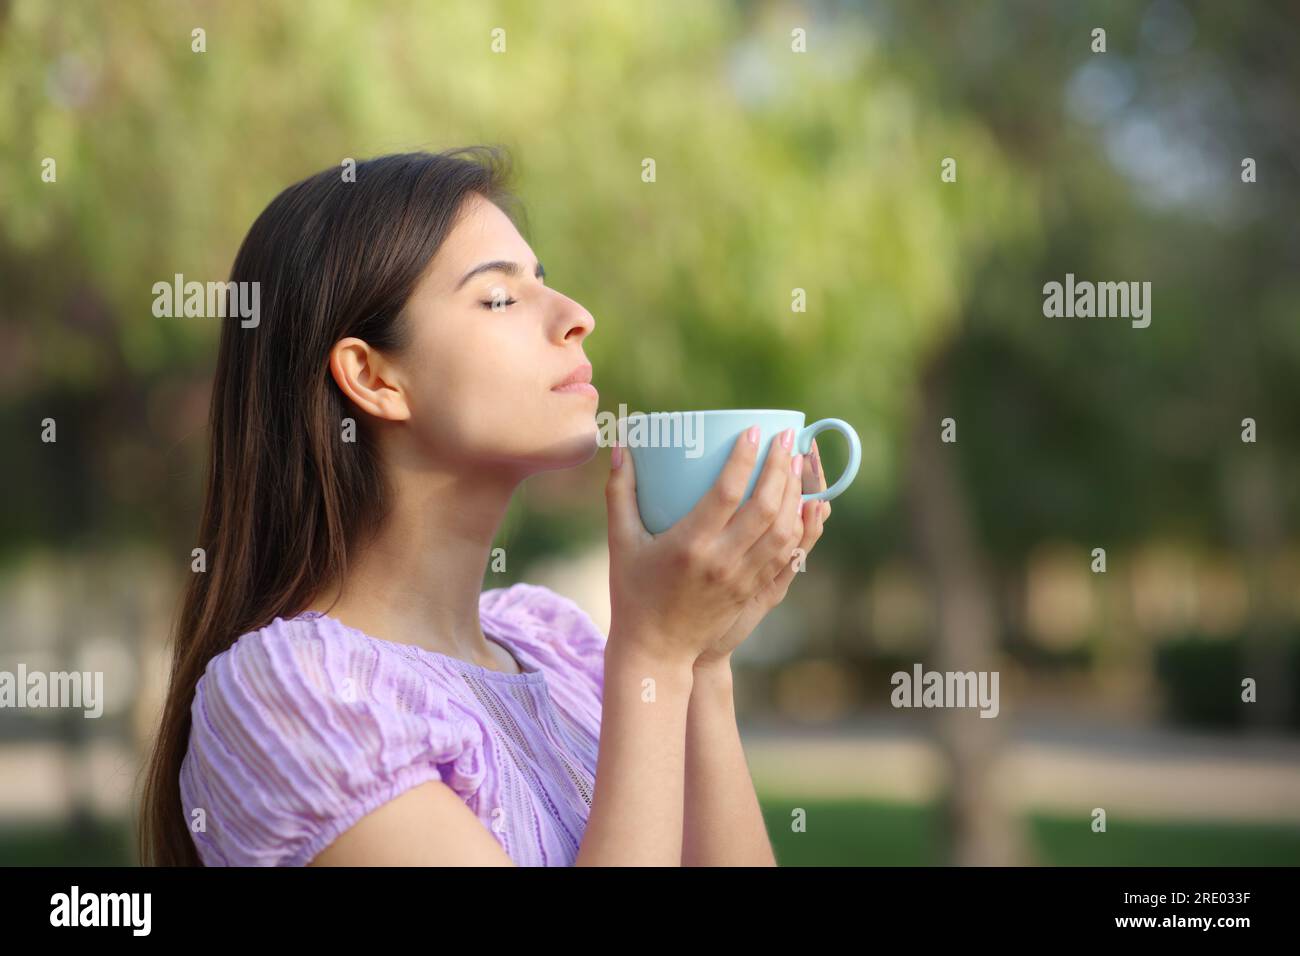 Side view portrait of a woman smelling coffee from mug in a park Stock Photo